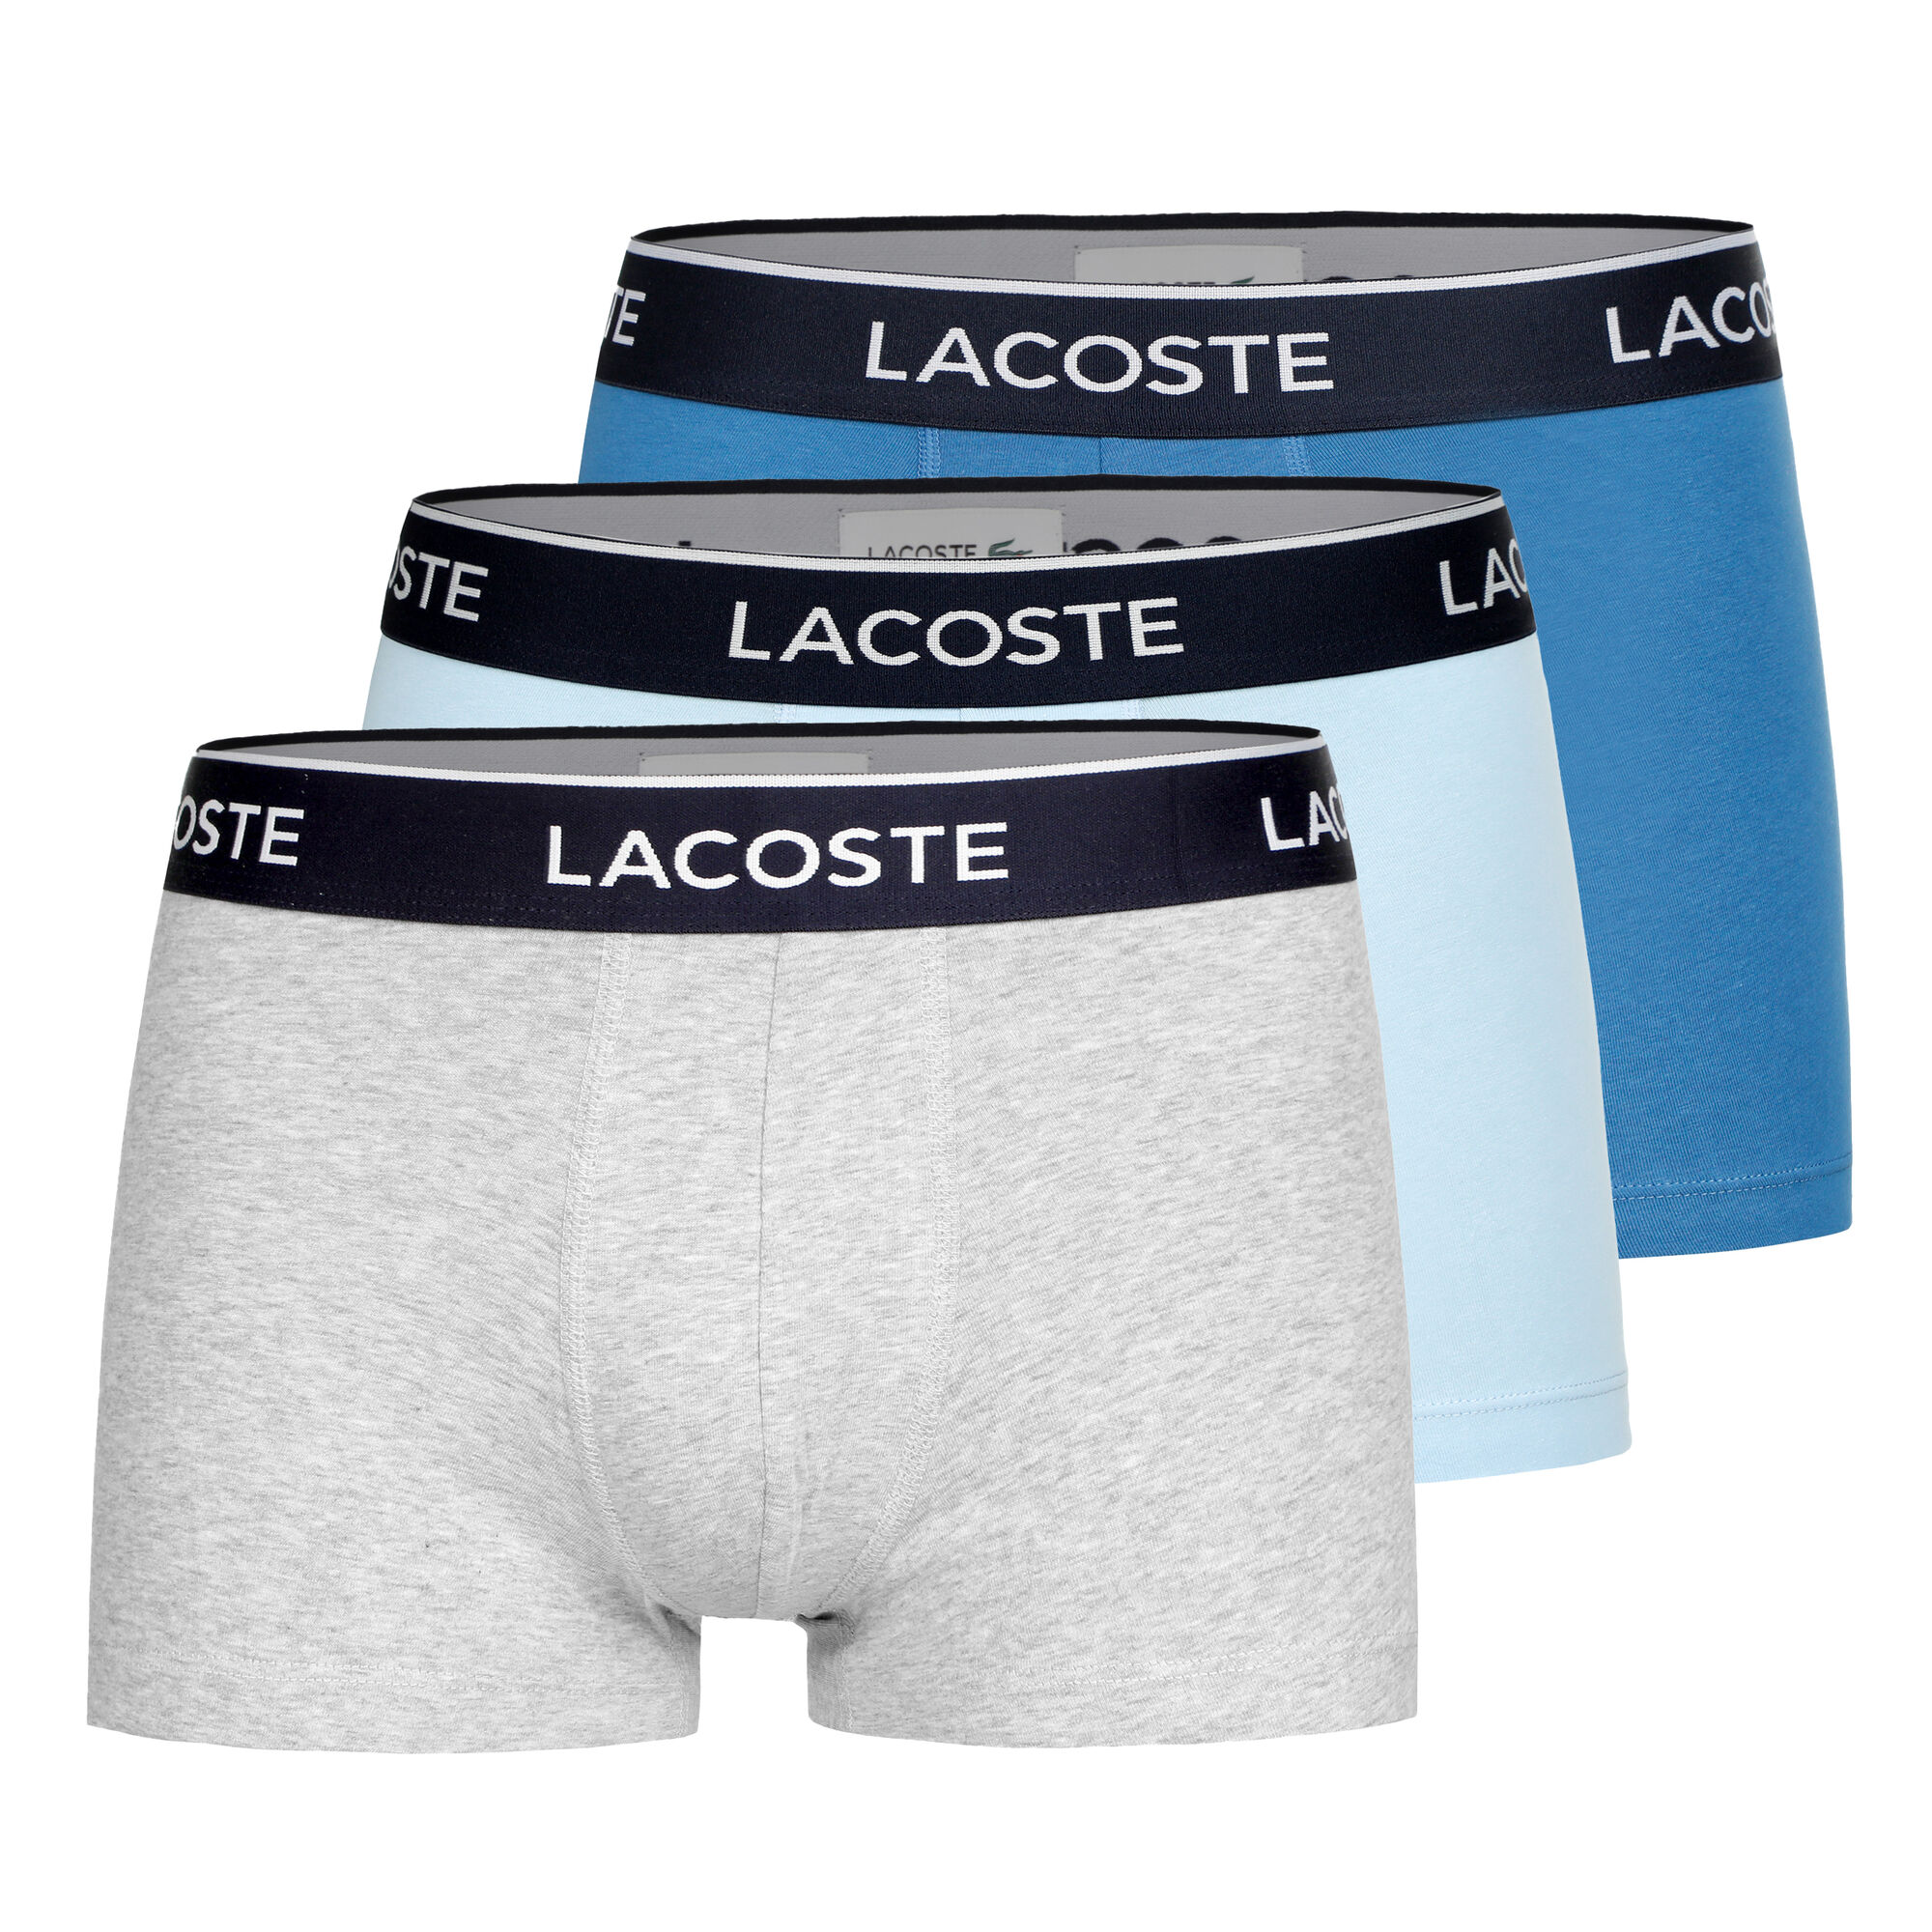 New Lacoste Boxer Briefs Mens' Underwear Casual 3-Pack Cotton Grey XL avail